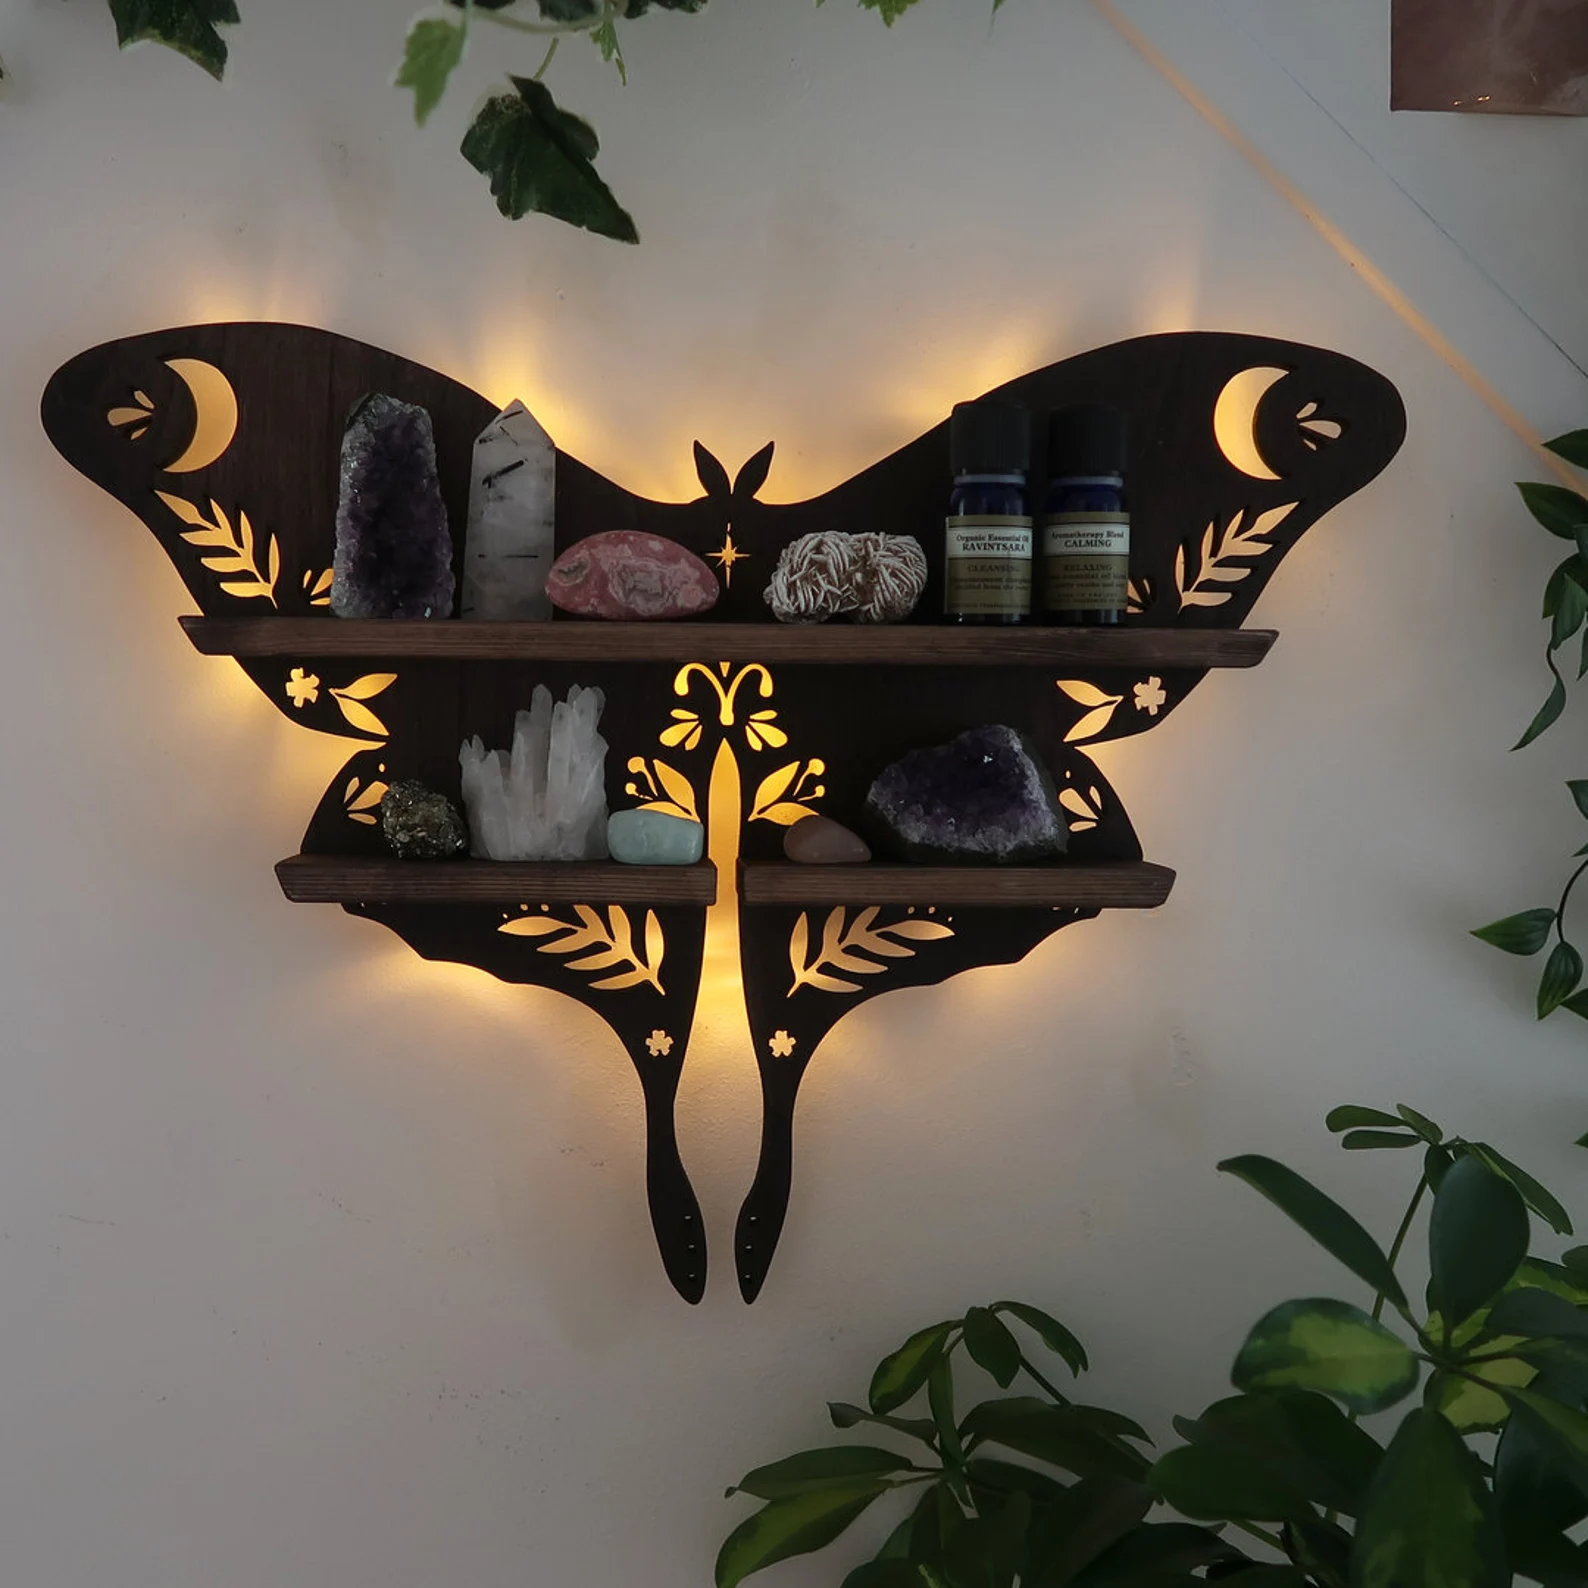 Luna Moth Shelf perfect for displaying crystals and trinkets